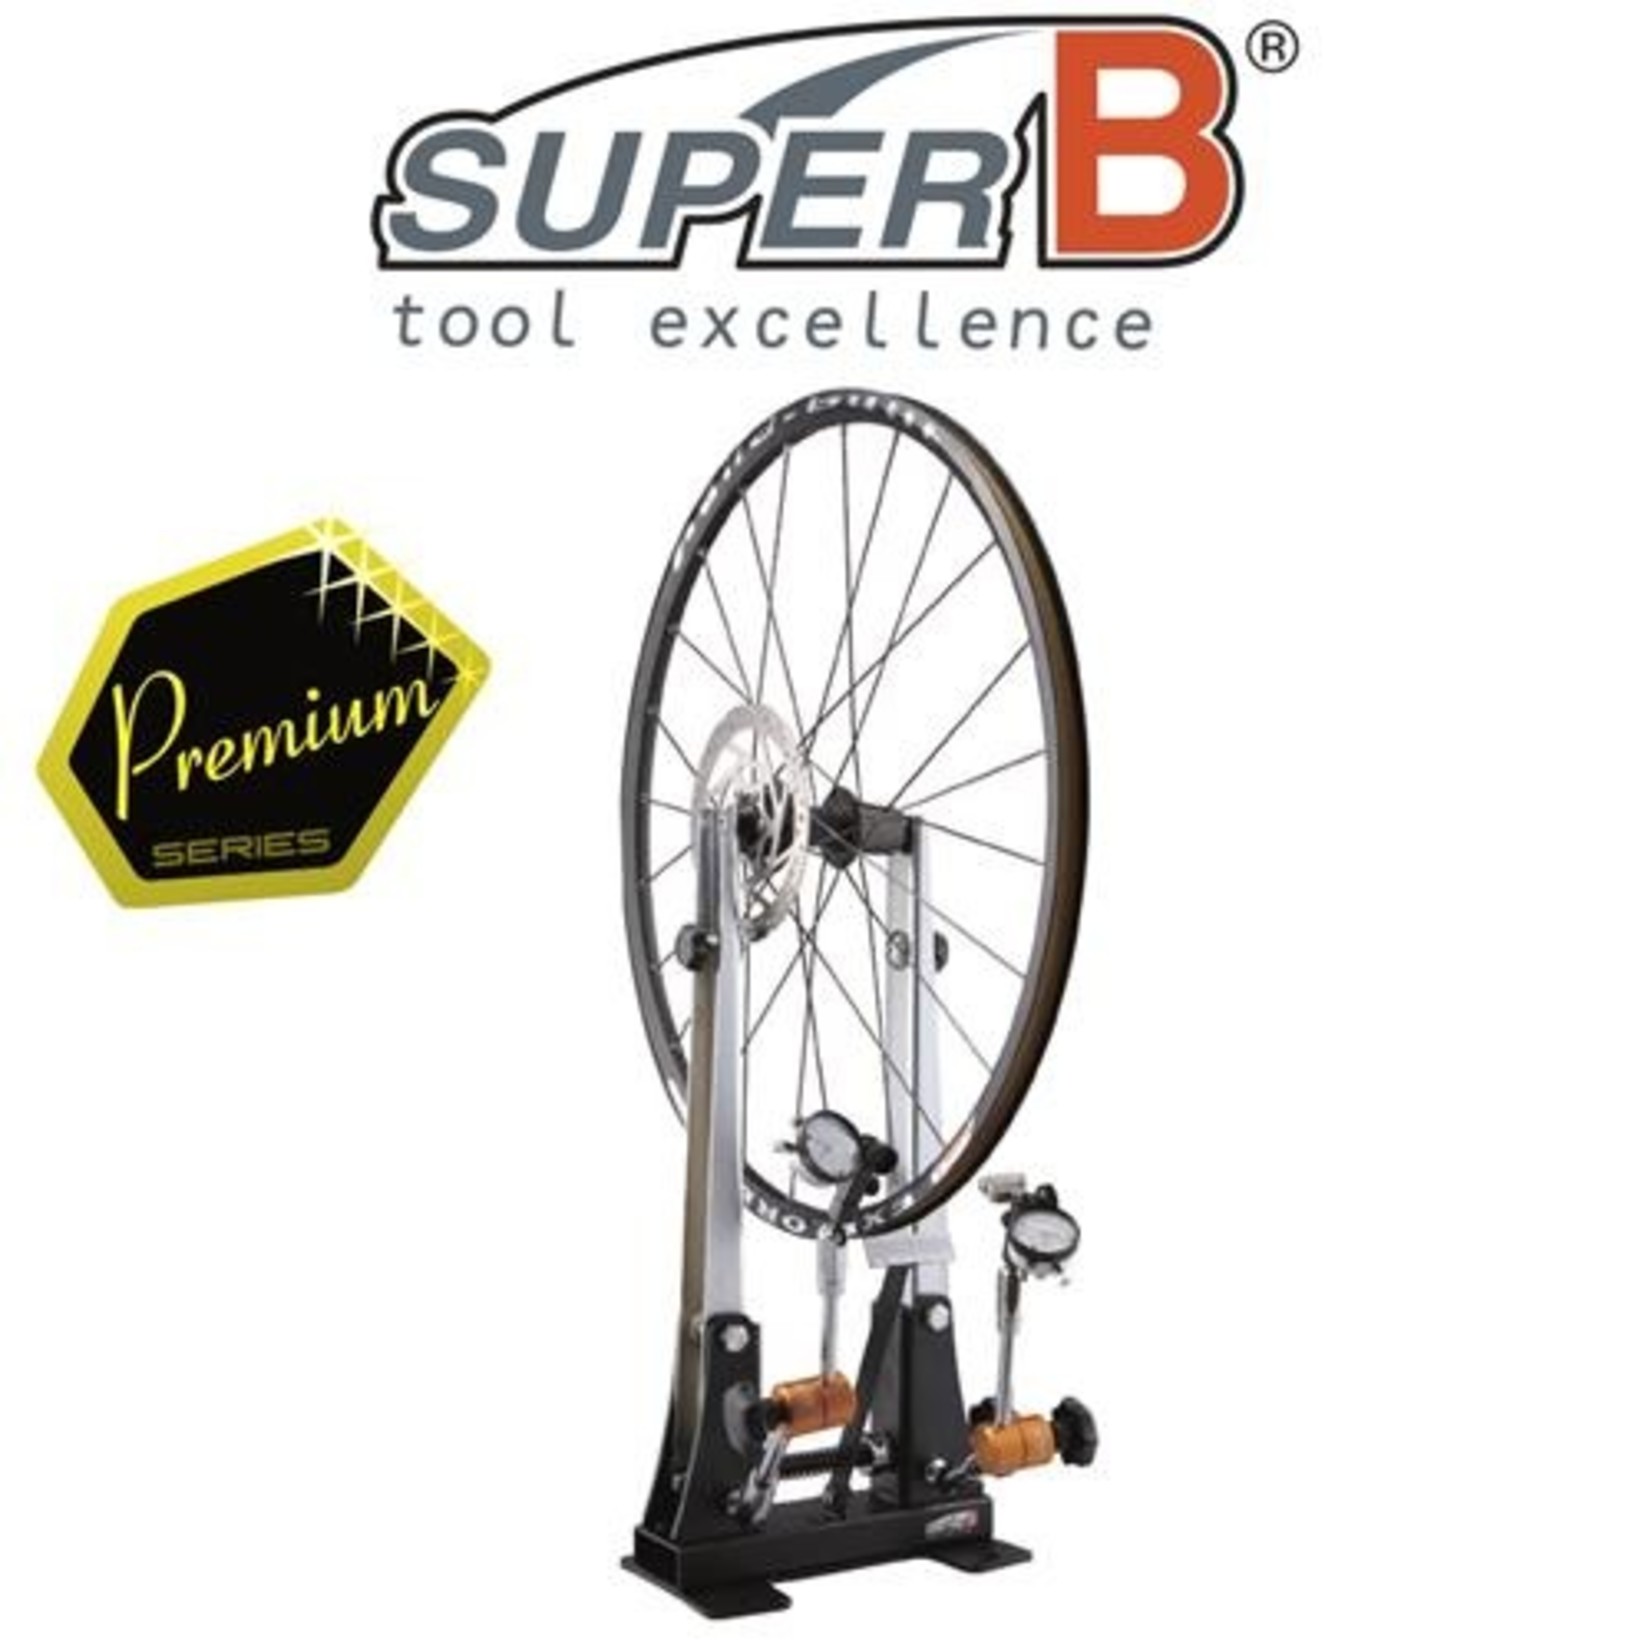 Super B SuperB Professional Wheel Truing Stand With Dial Indicator Bike Tool